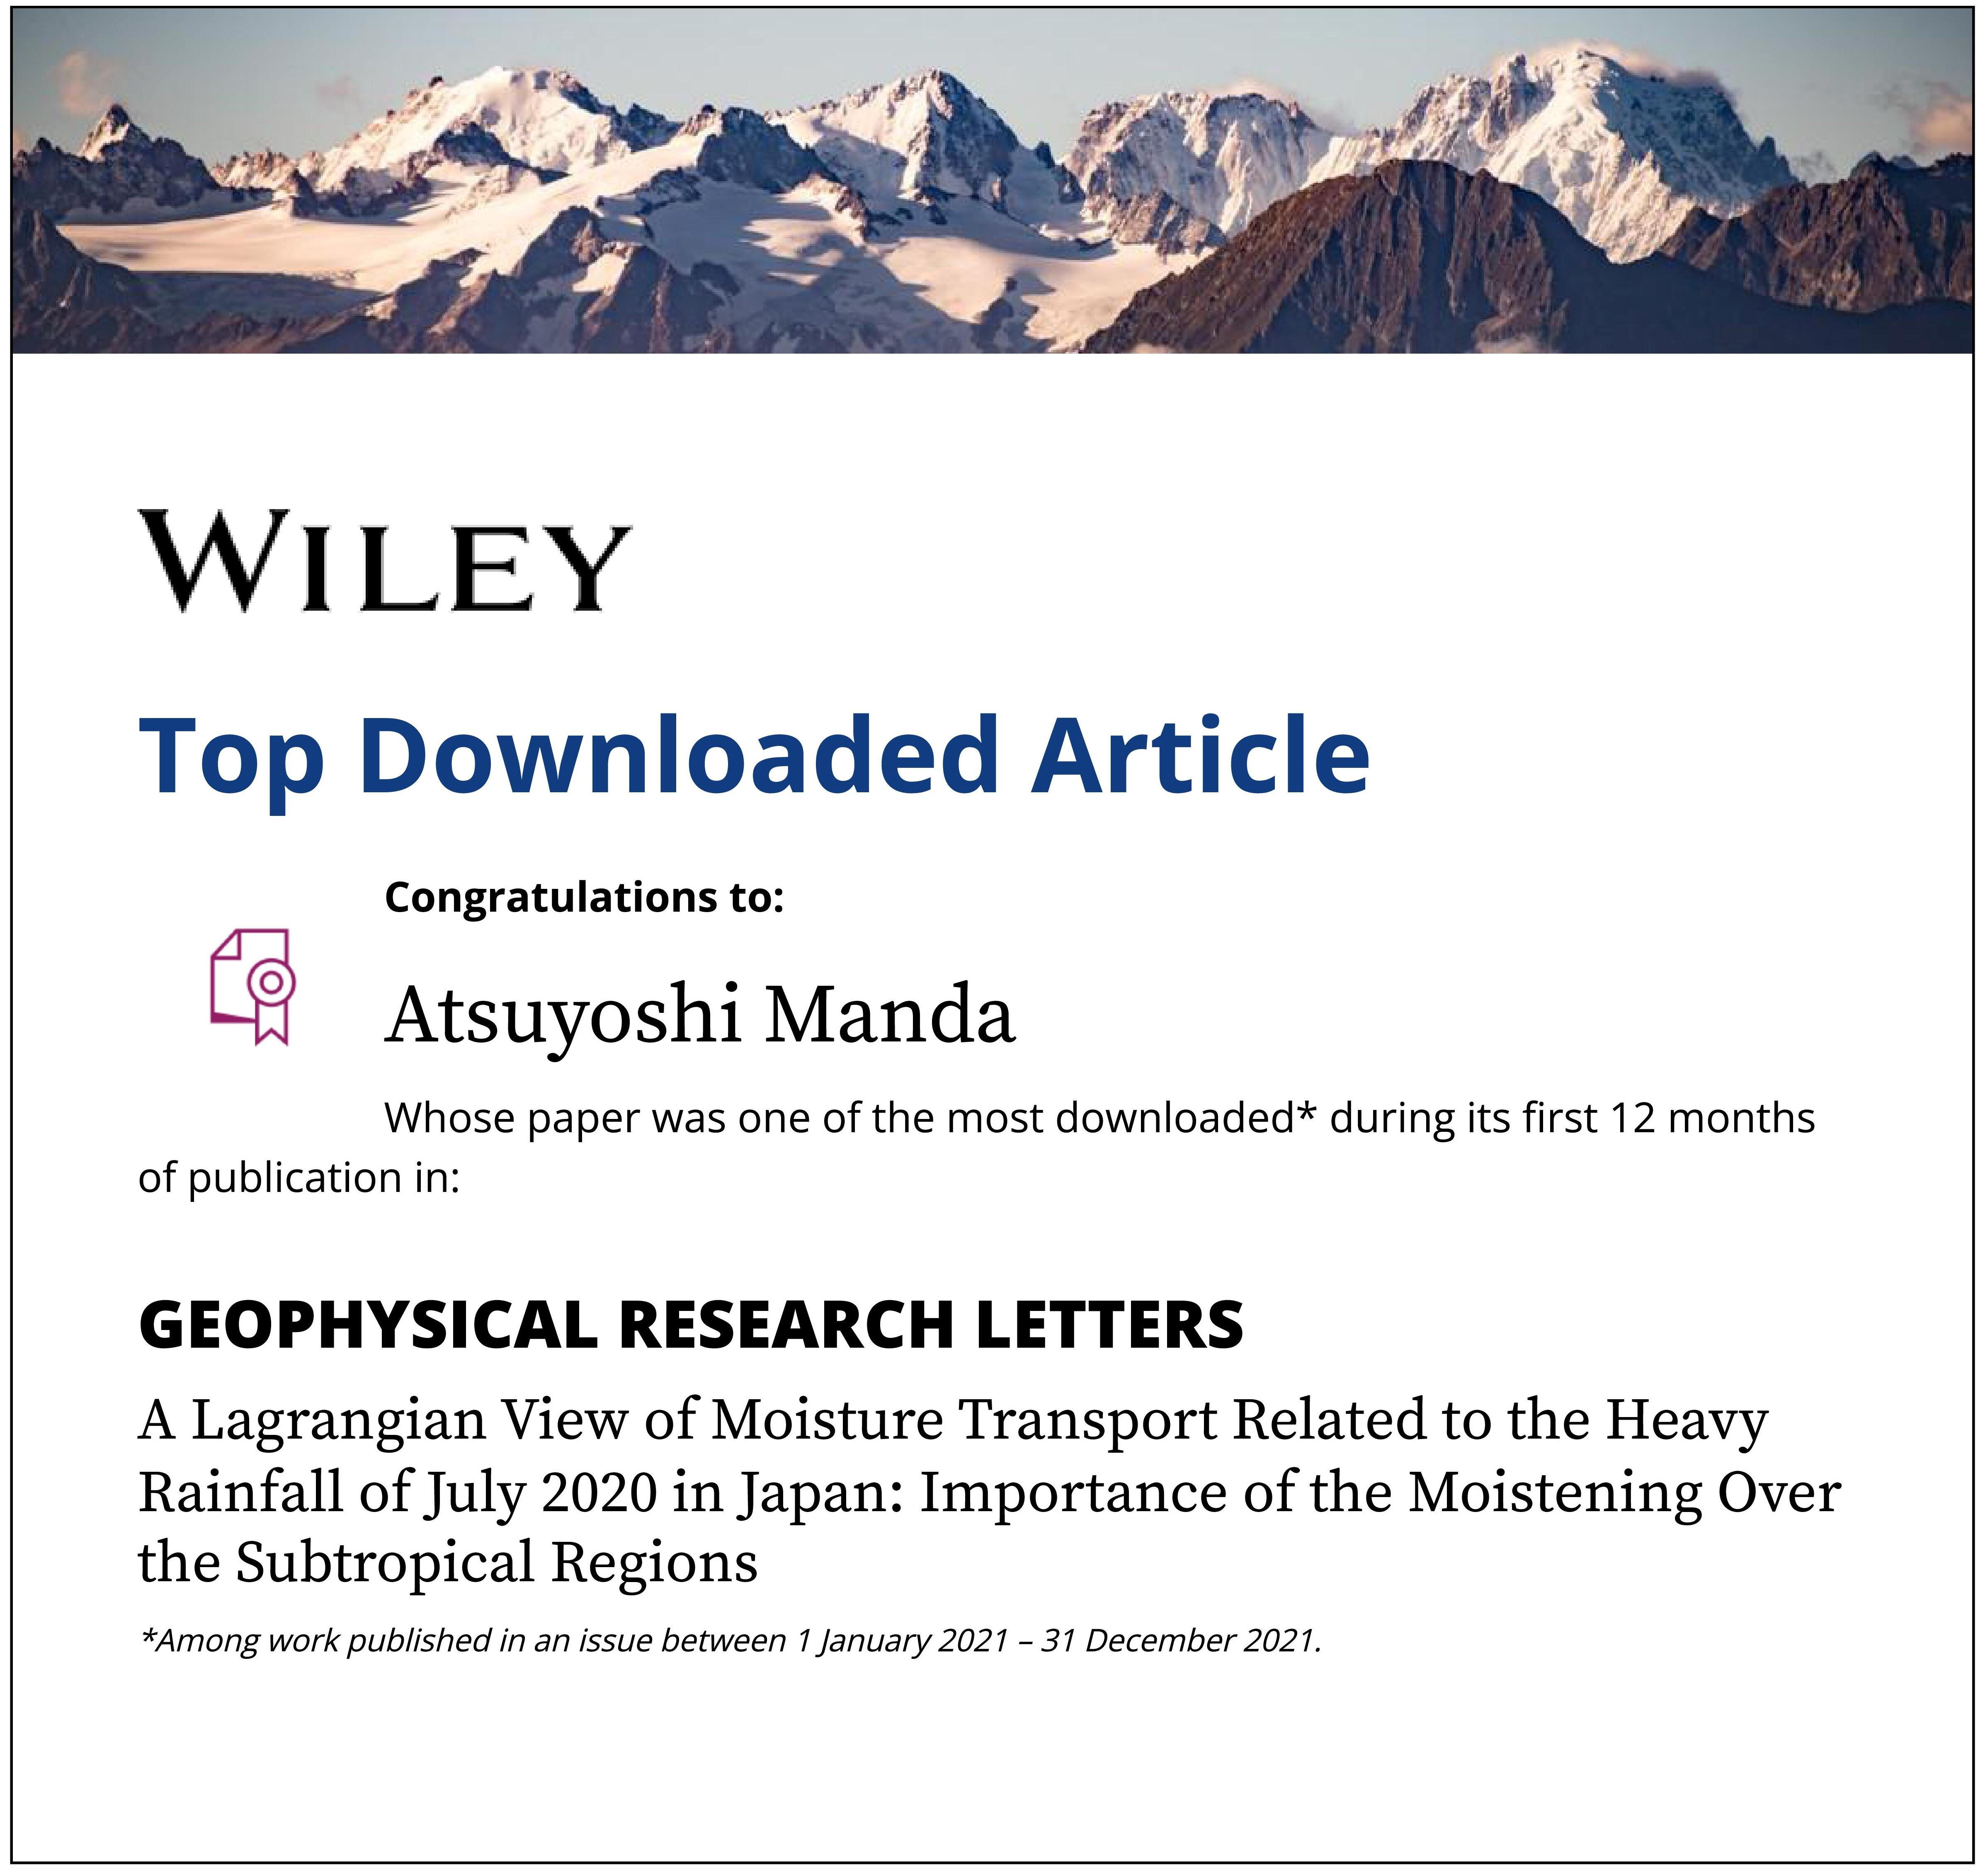 WILY Top Downloaded Article 2021